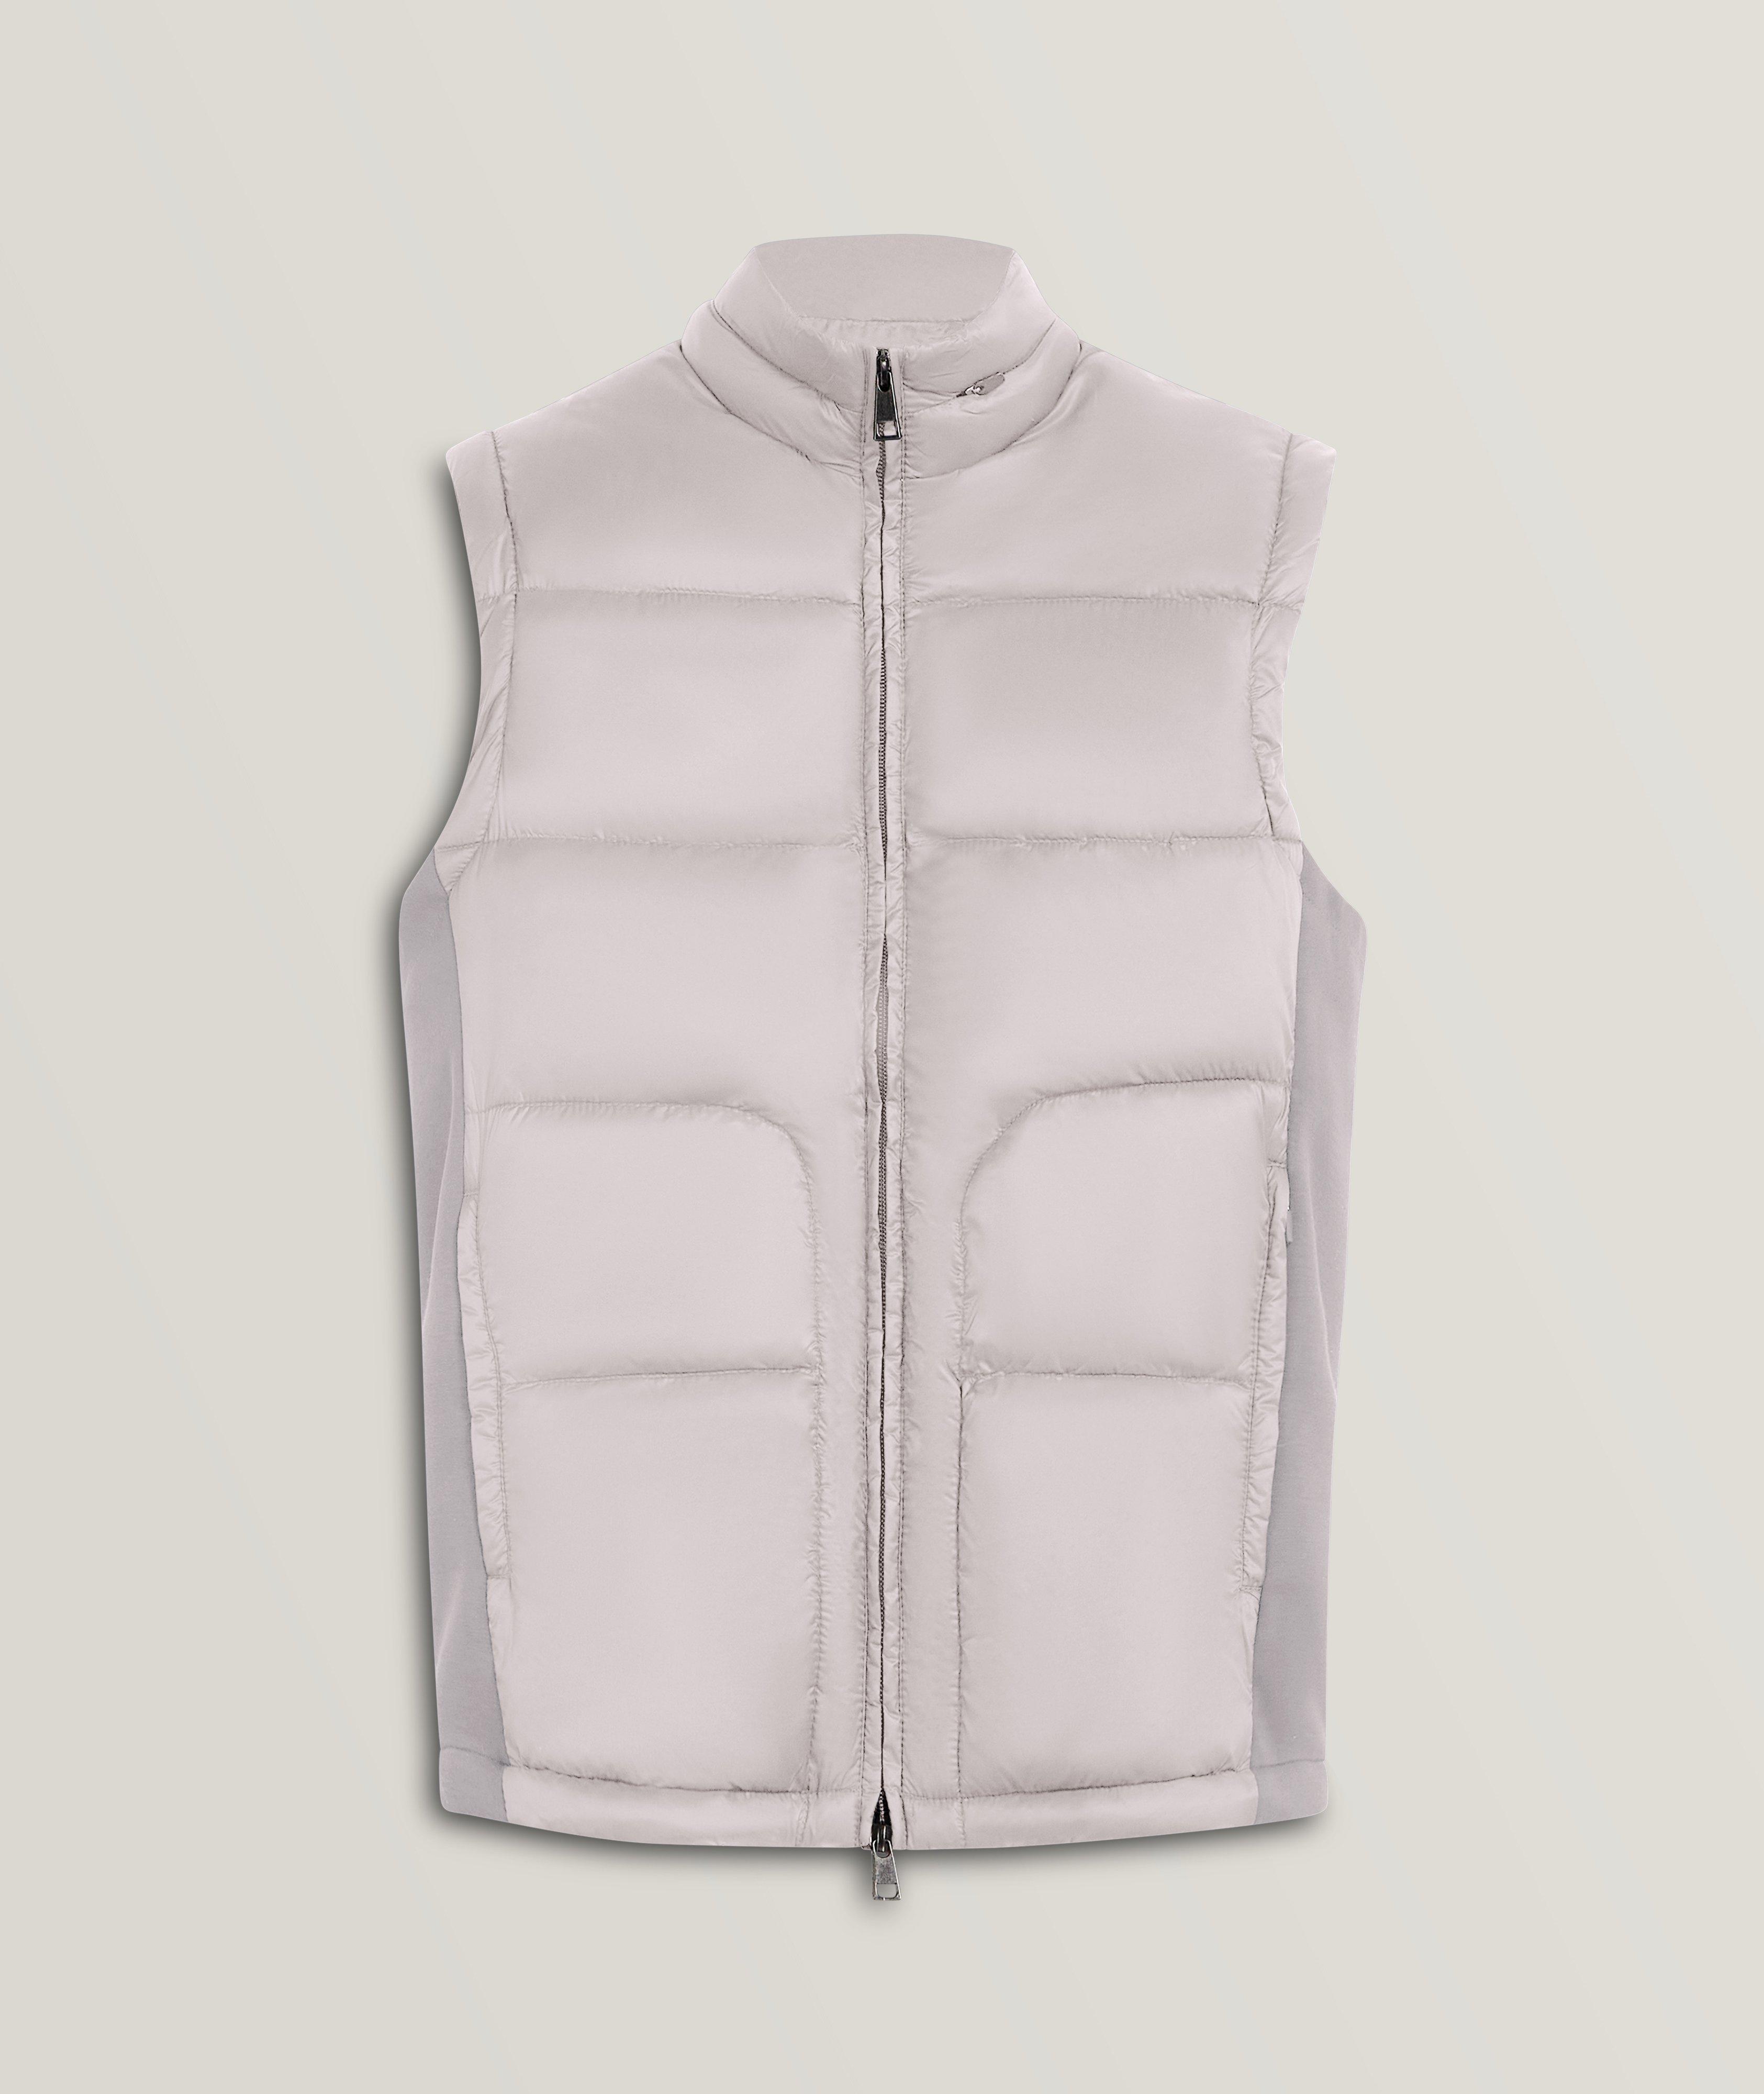 Quilted Mixed Material Nylon Vest image 0